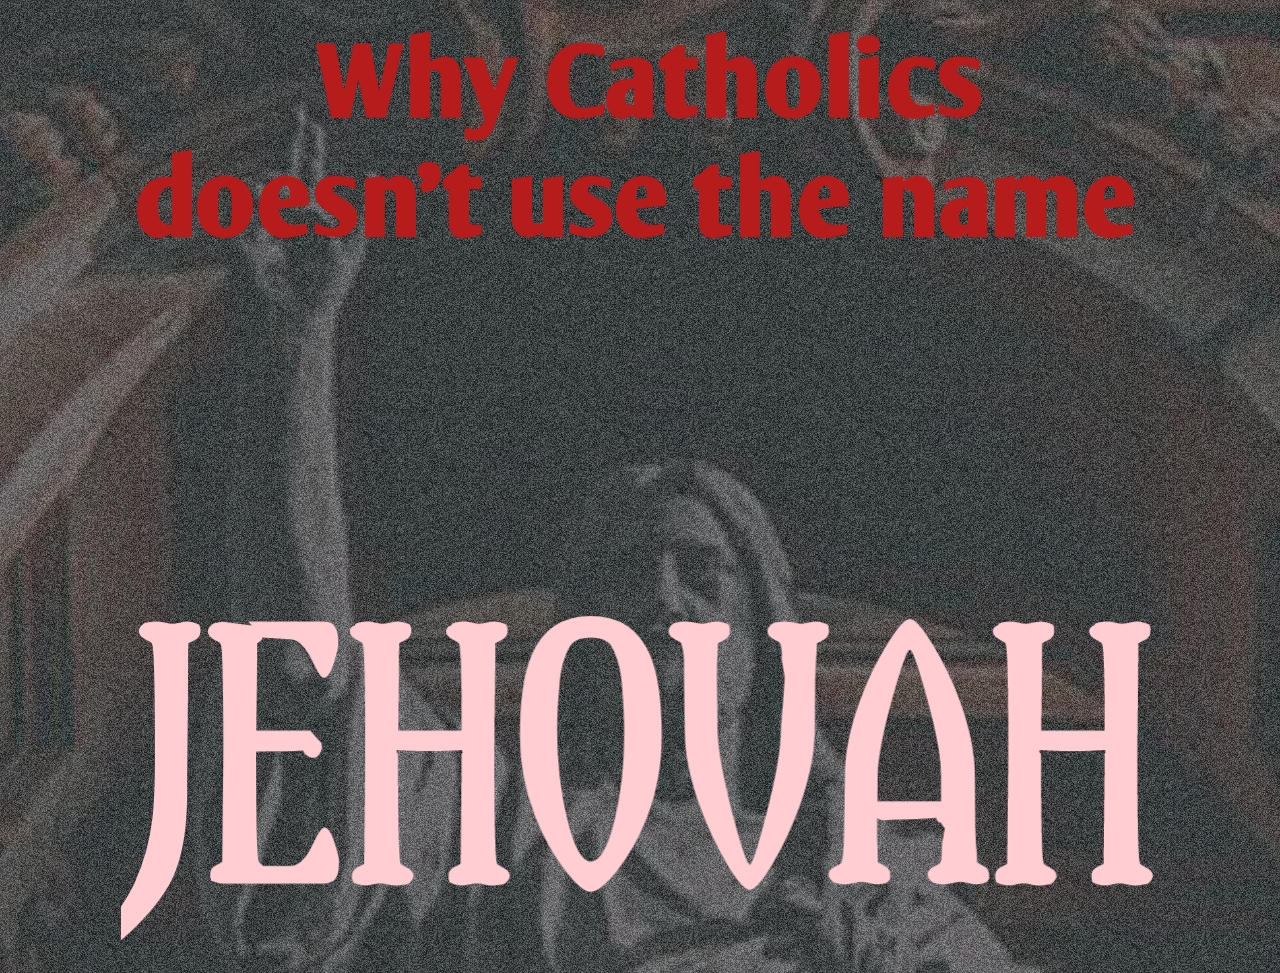 Why Catholics doesn't use the name Jehovah